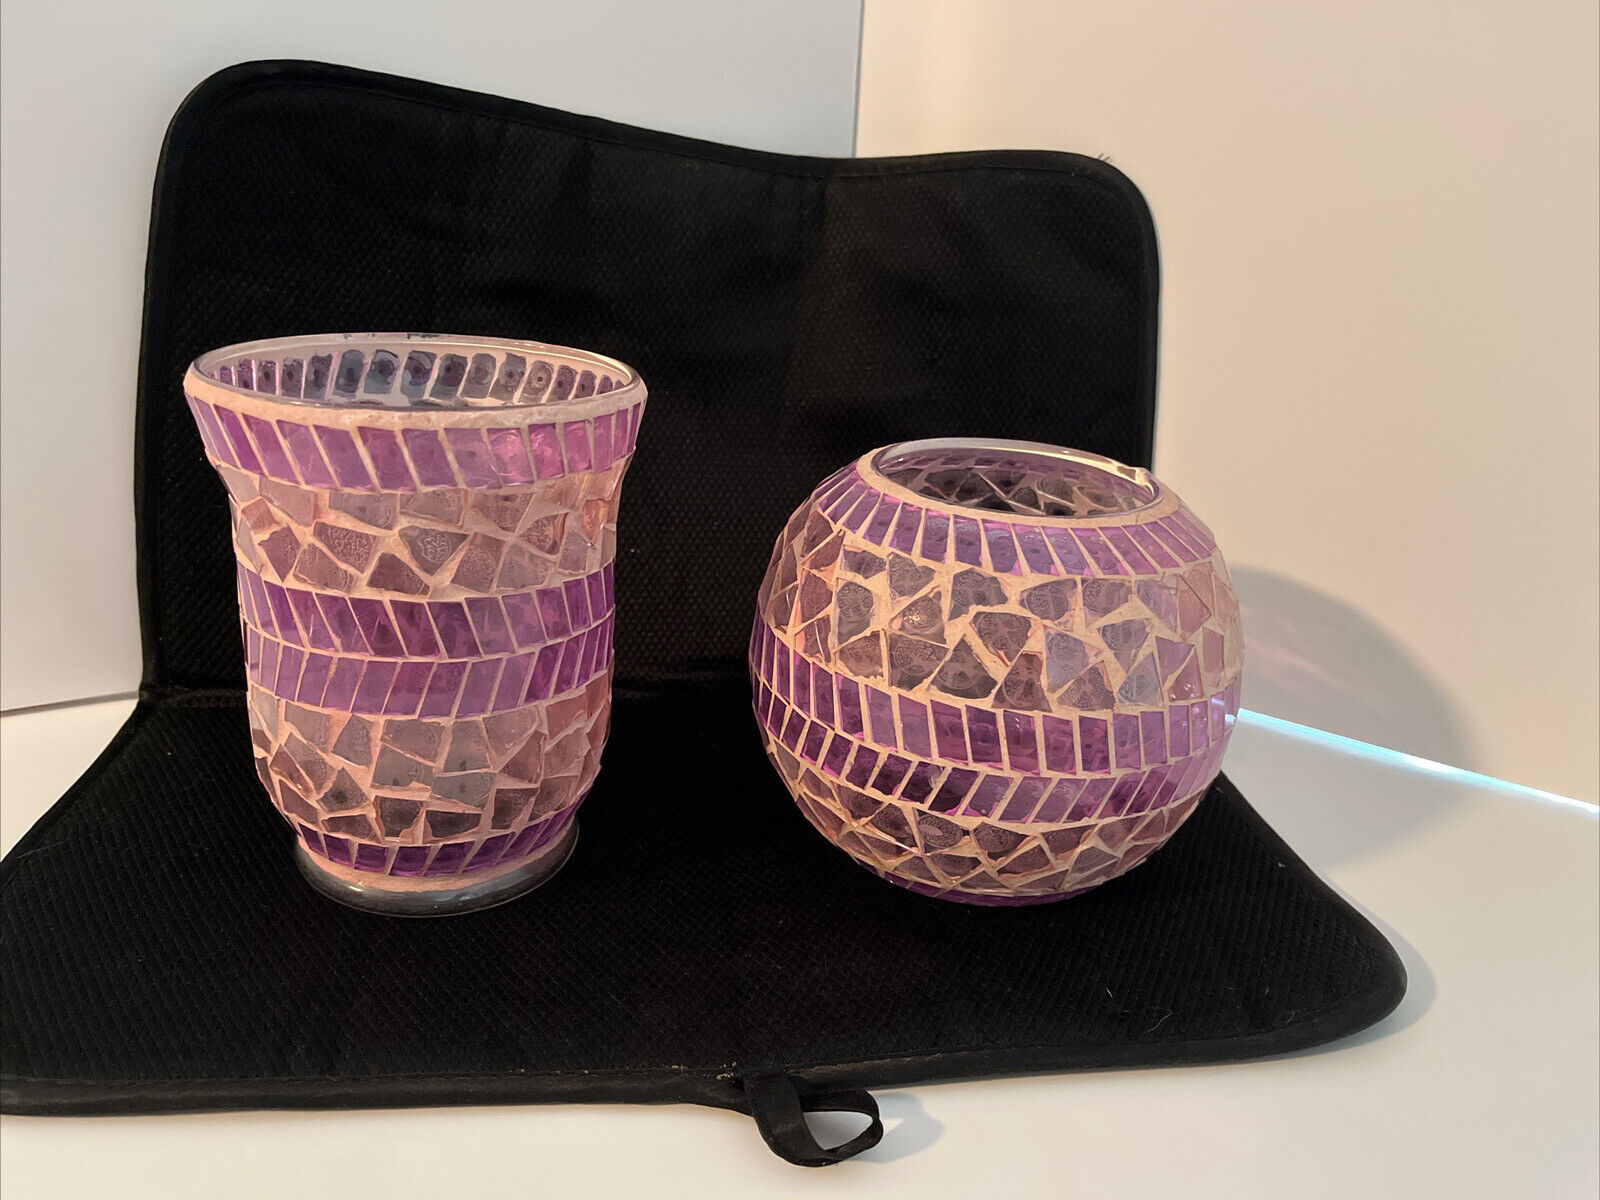 Unbranded Pink & Purple Cut Glass in Clay Art Decor Collectible Bowls SET OF 2.